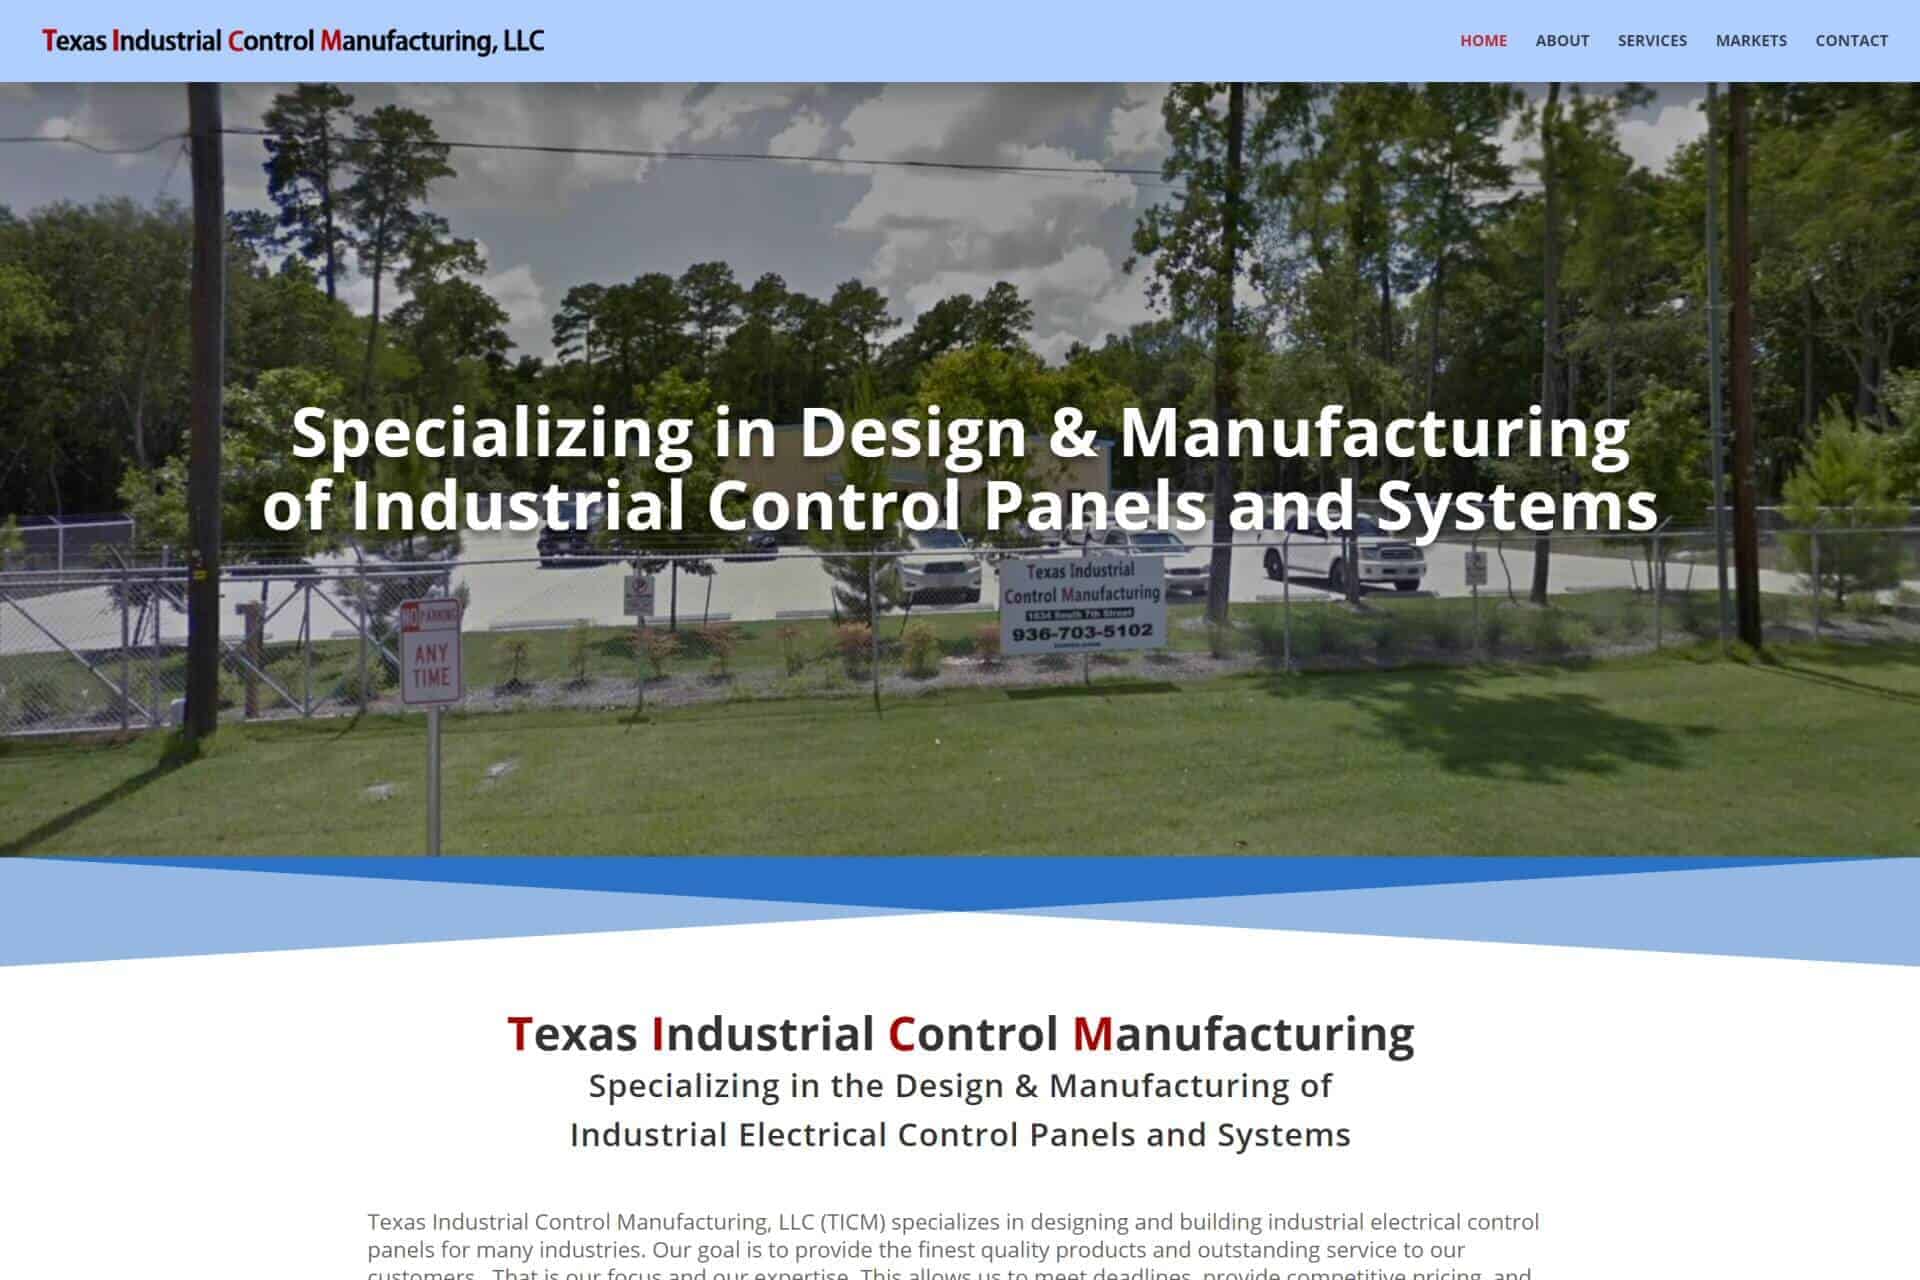 Texas Industrial Control Manufacturing Industrial Electrical Control Panels by All Star Pools